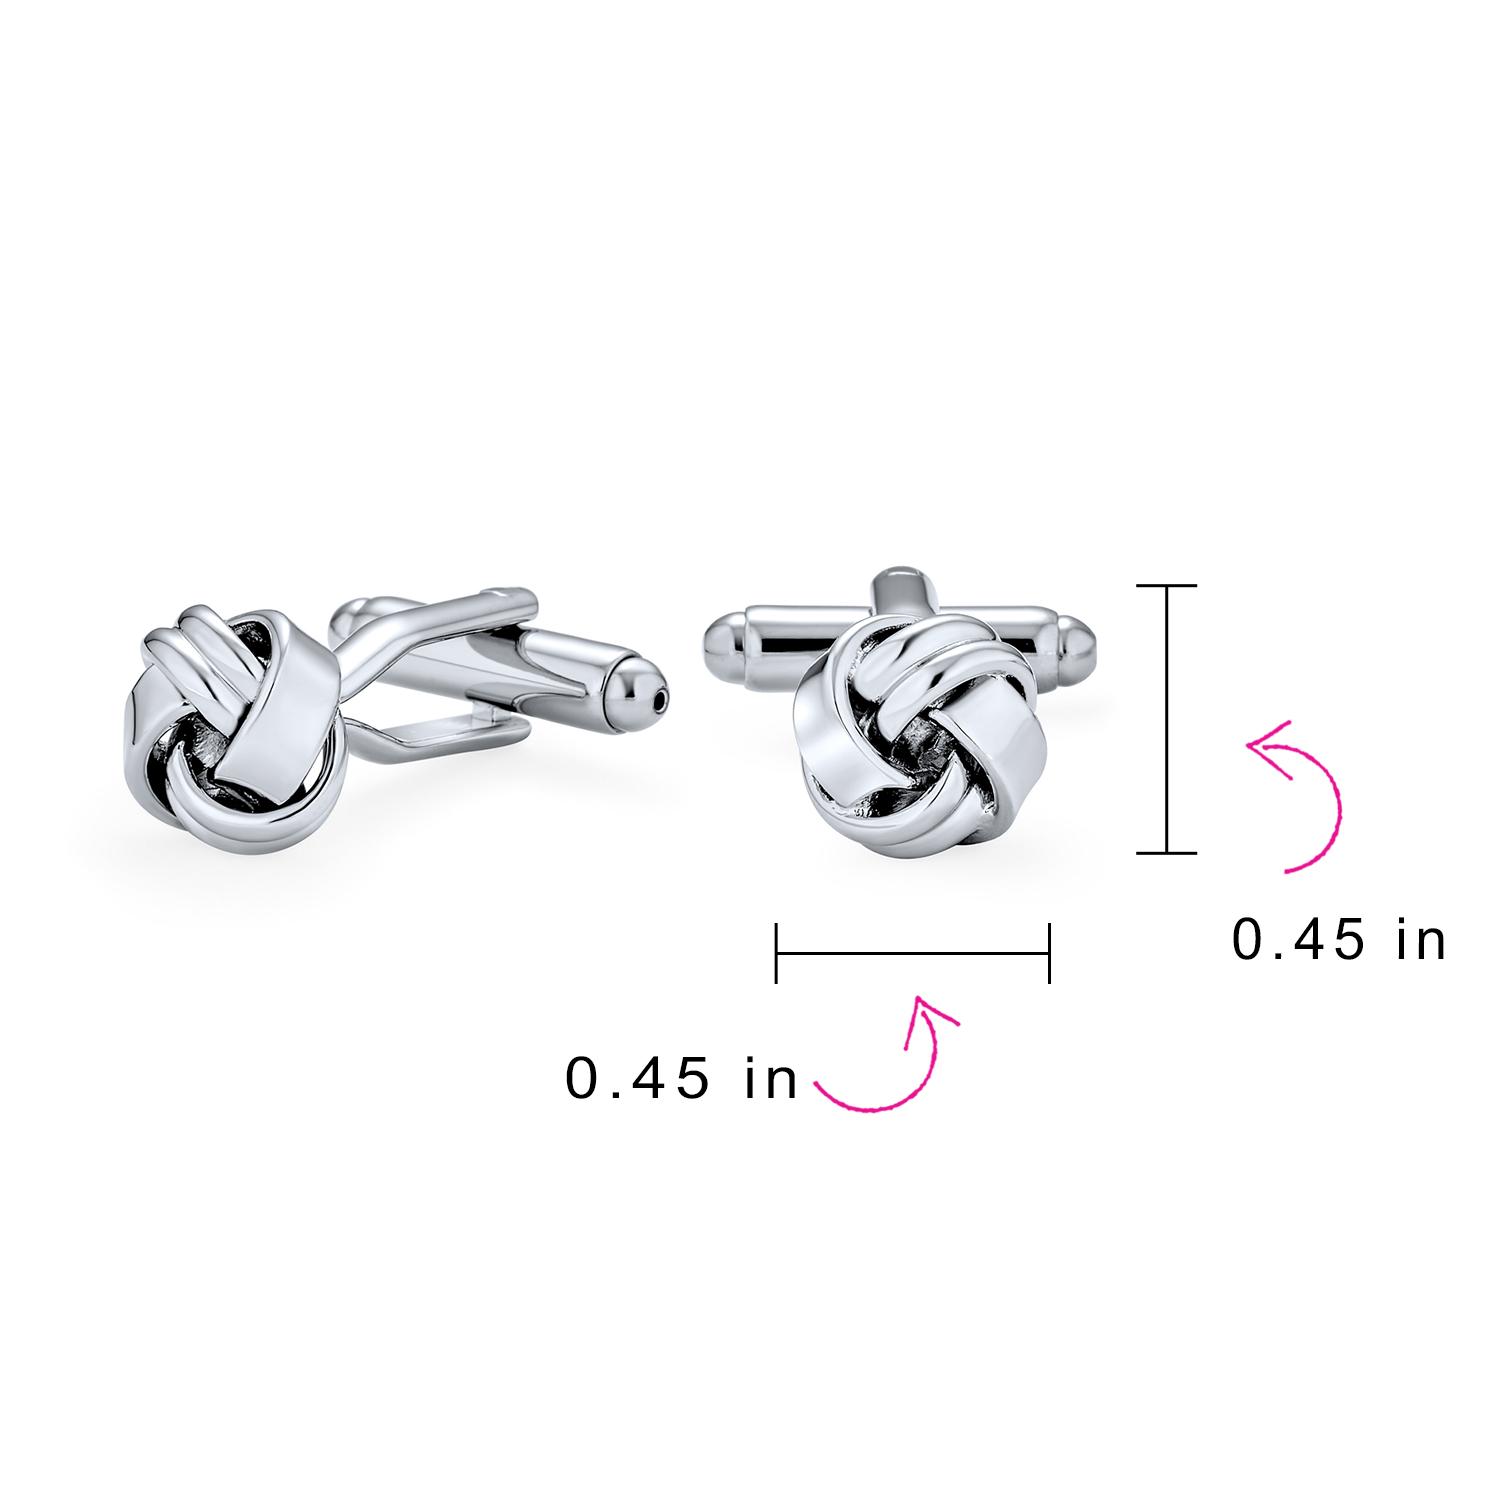 Bling Jewelry Signal Knot Woven Rope Braid Twist Shirt Cufflinks Stainless Steel - image 4 of 5